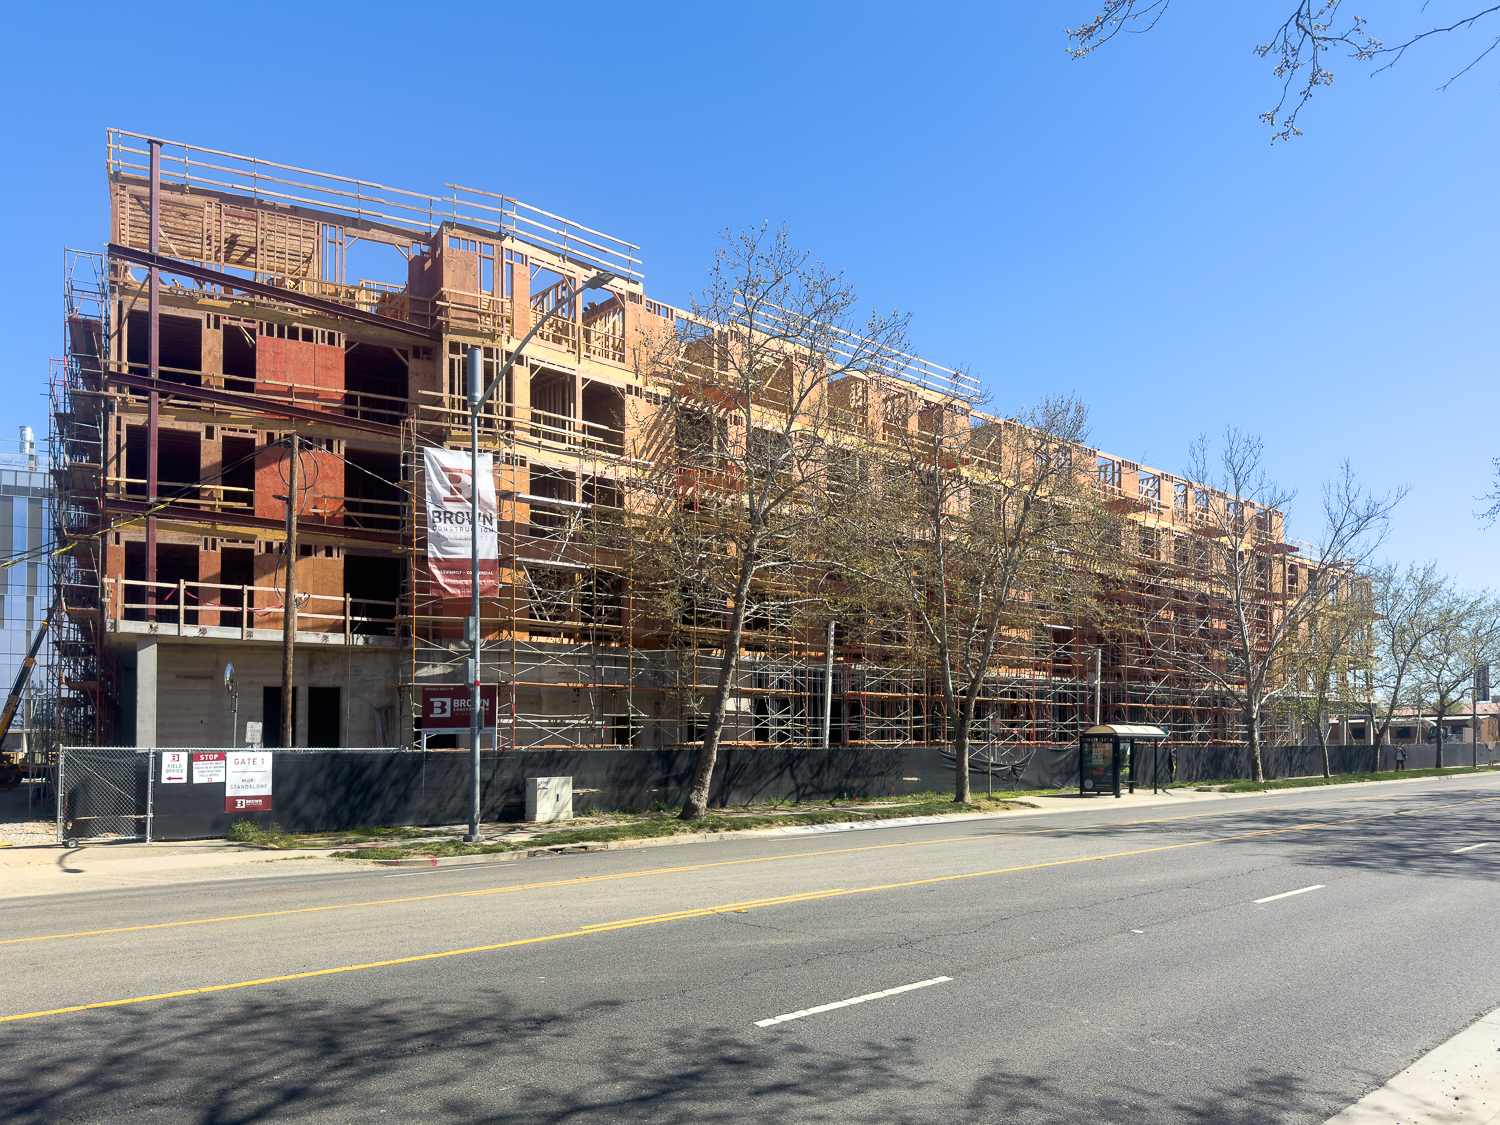 Aggie Square student housing under construction, image by author